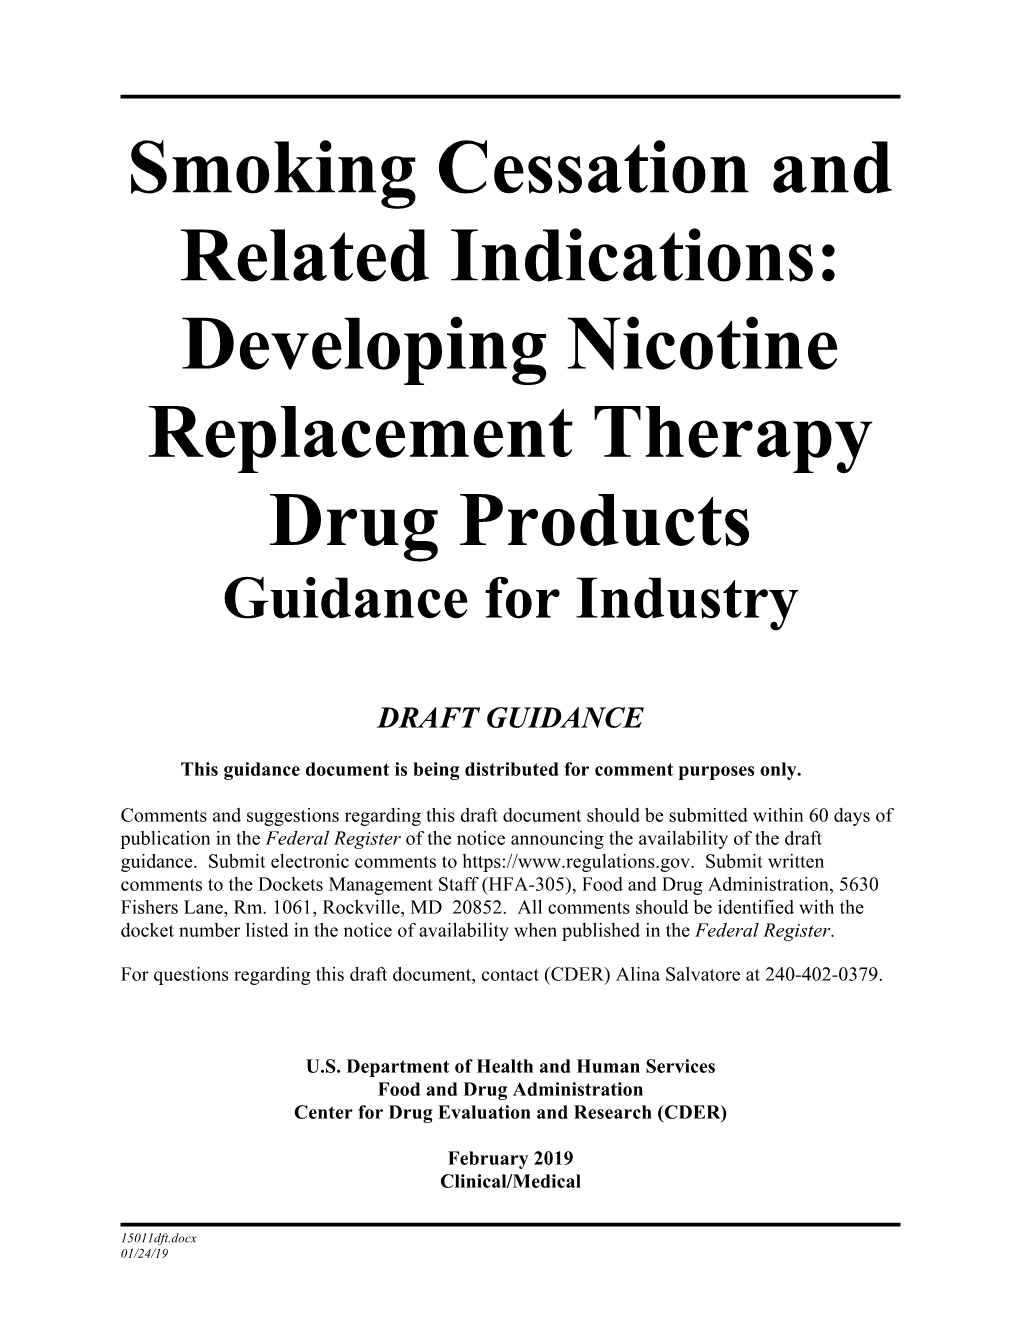 Smoking Cessation and Related Indications: Developing Nicotine Replacement Therapy Drug Products Guidance for Industry